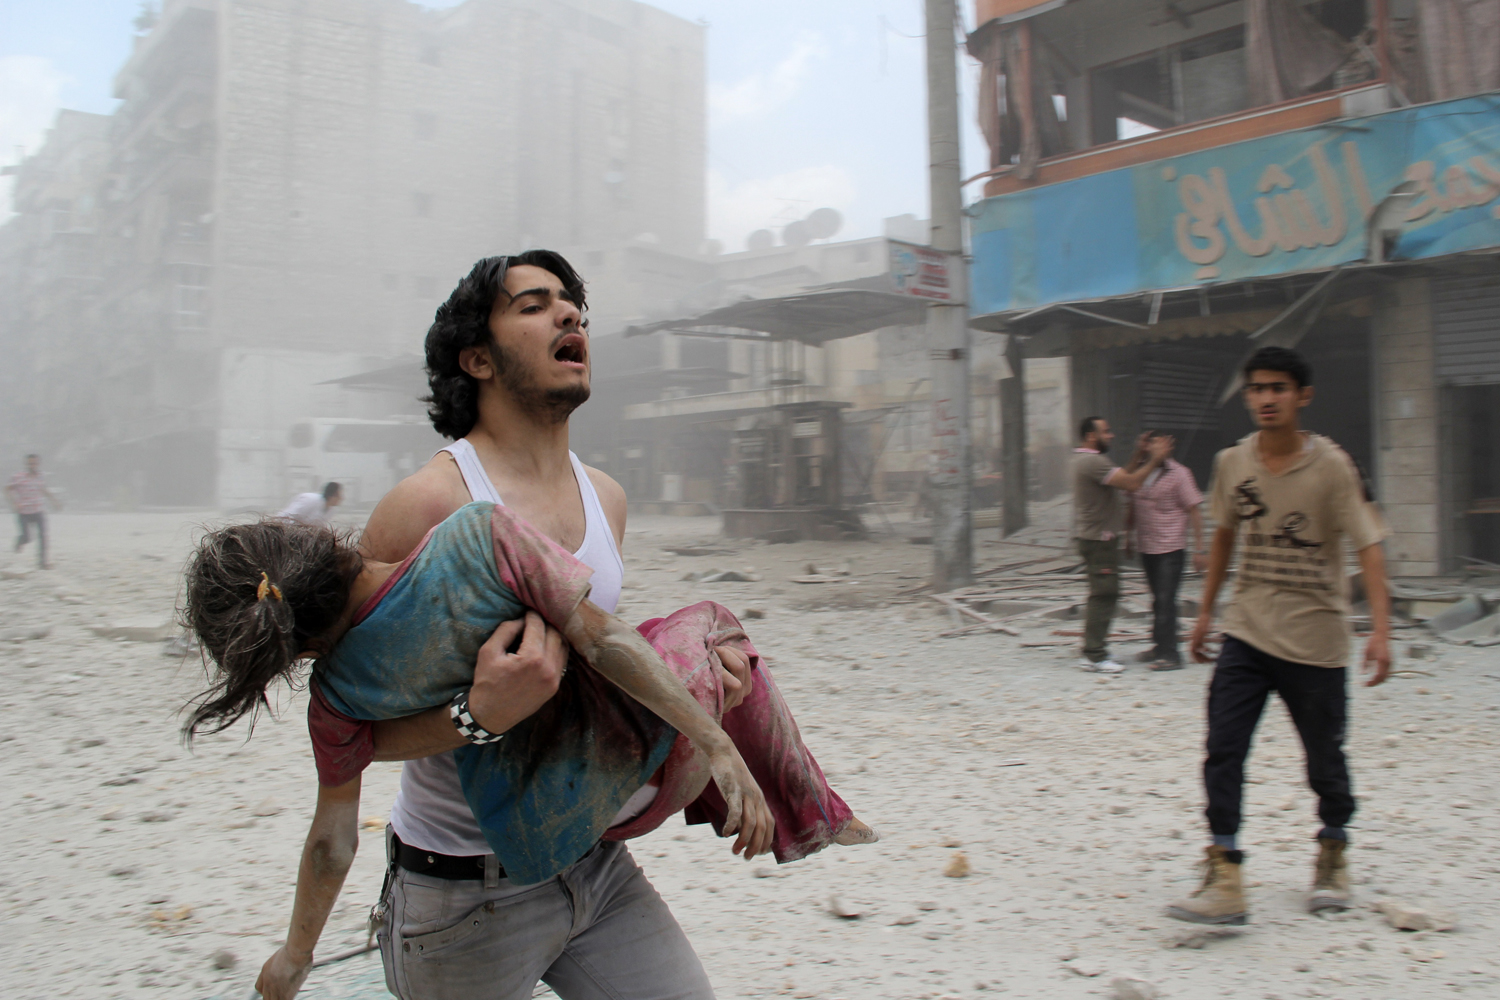 A man carries a young girl who was injured in a reported barrel-bomb attack by government forces on June 3, 2014 in Kallaseh district in the northern city of Aleppo, Syria.